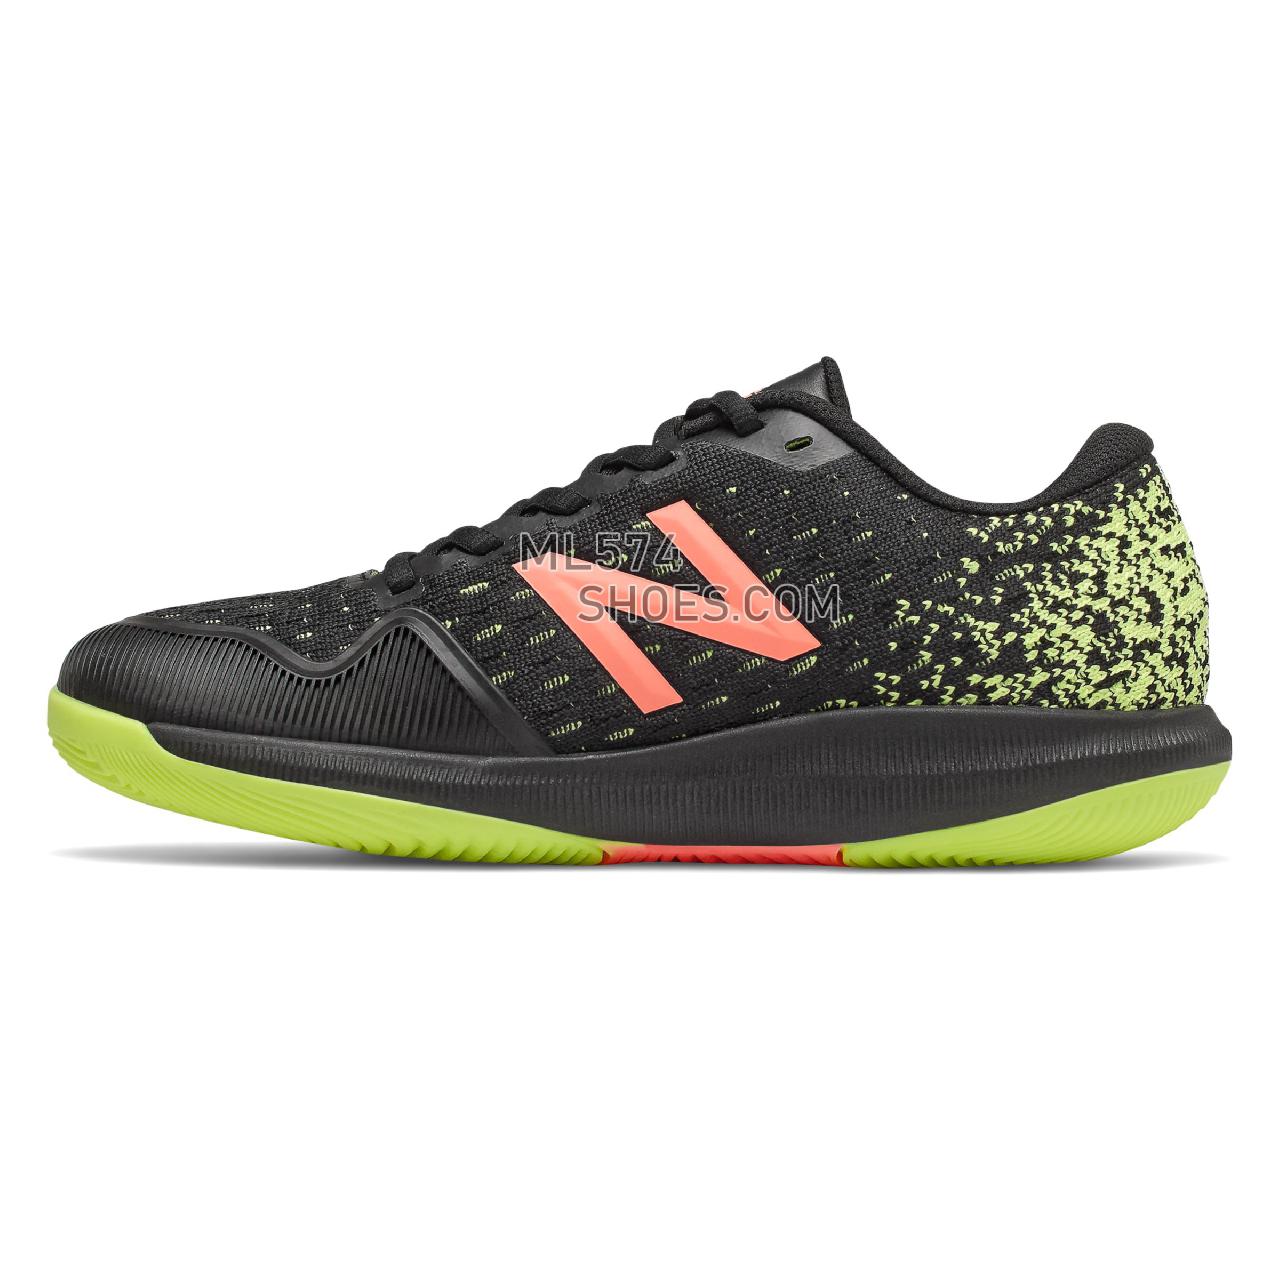 New Balance FuelCell 996v4 - Women's Tennis - Black with Lemon Slush and Pink - WCH996M4